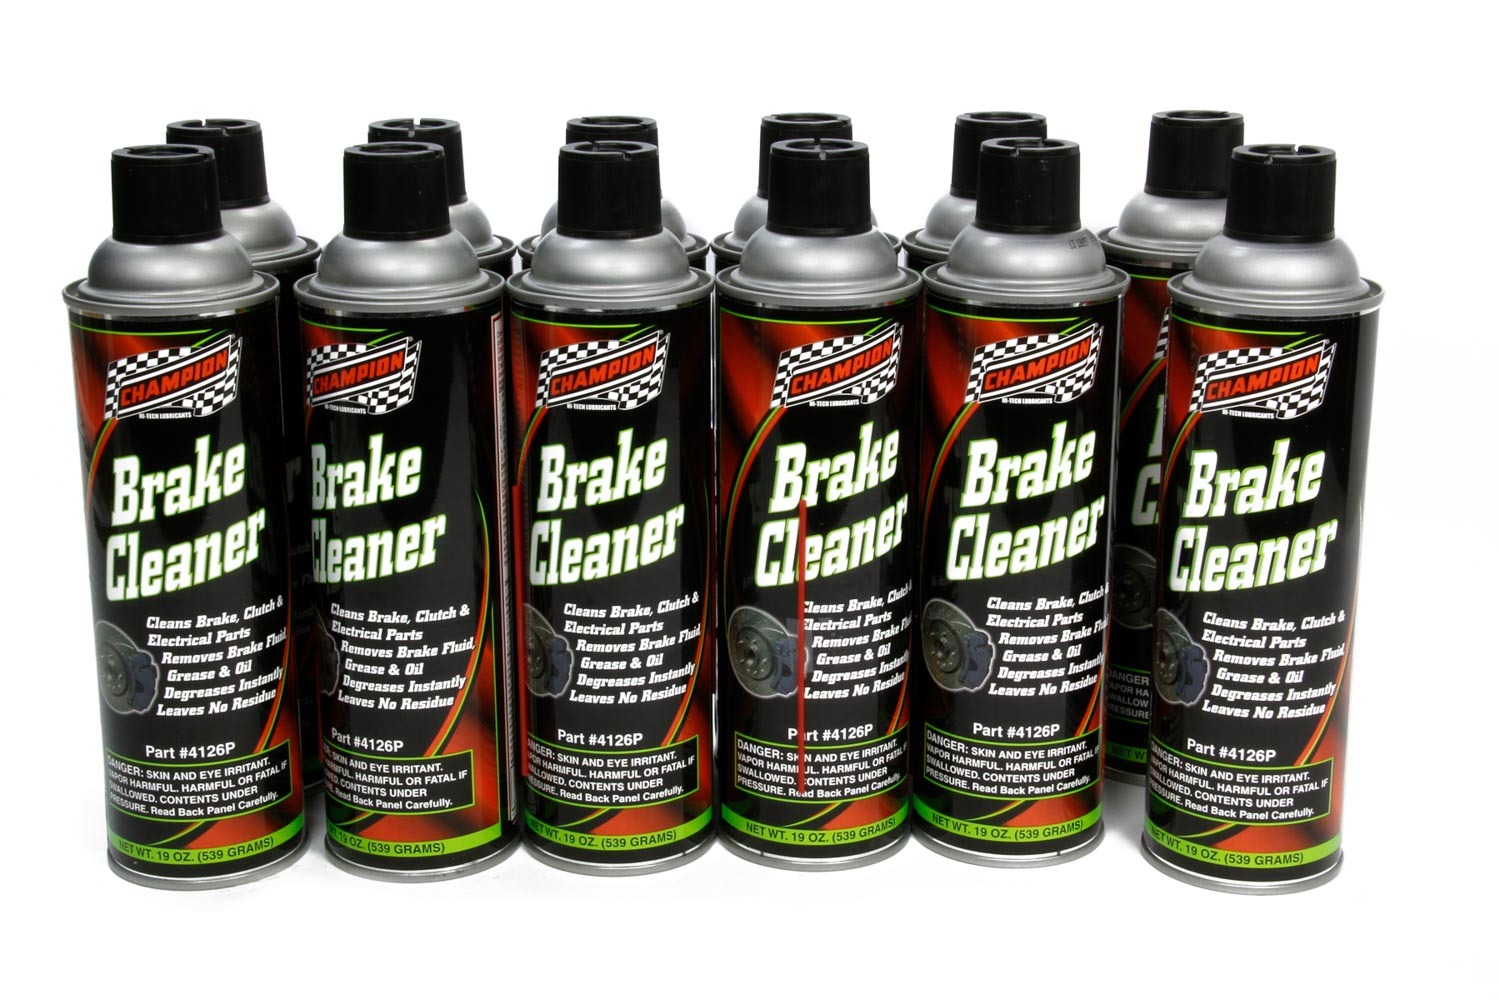 CHAMPION BRAND, Brake Cleaner Chlorinate d Case 12x19oz Cans